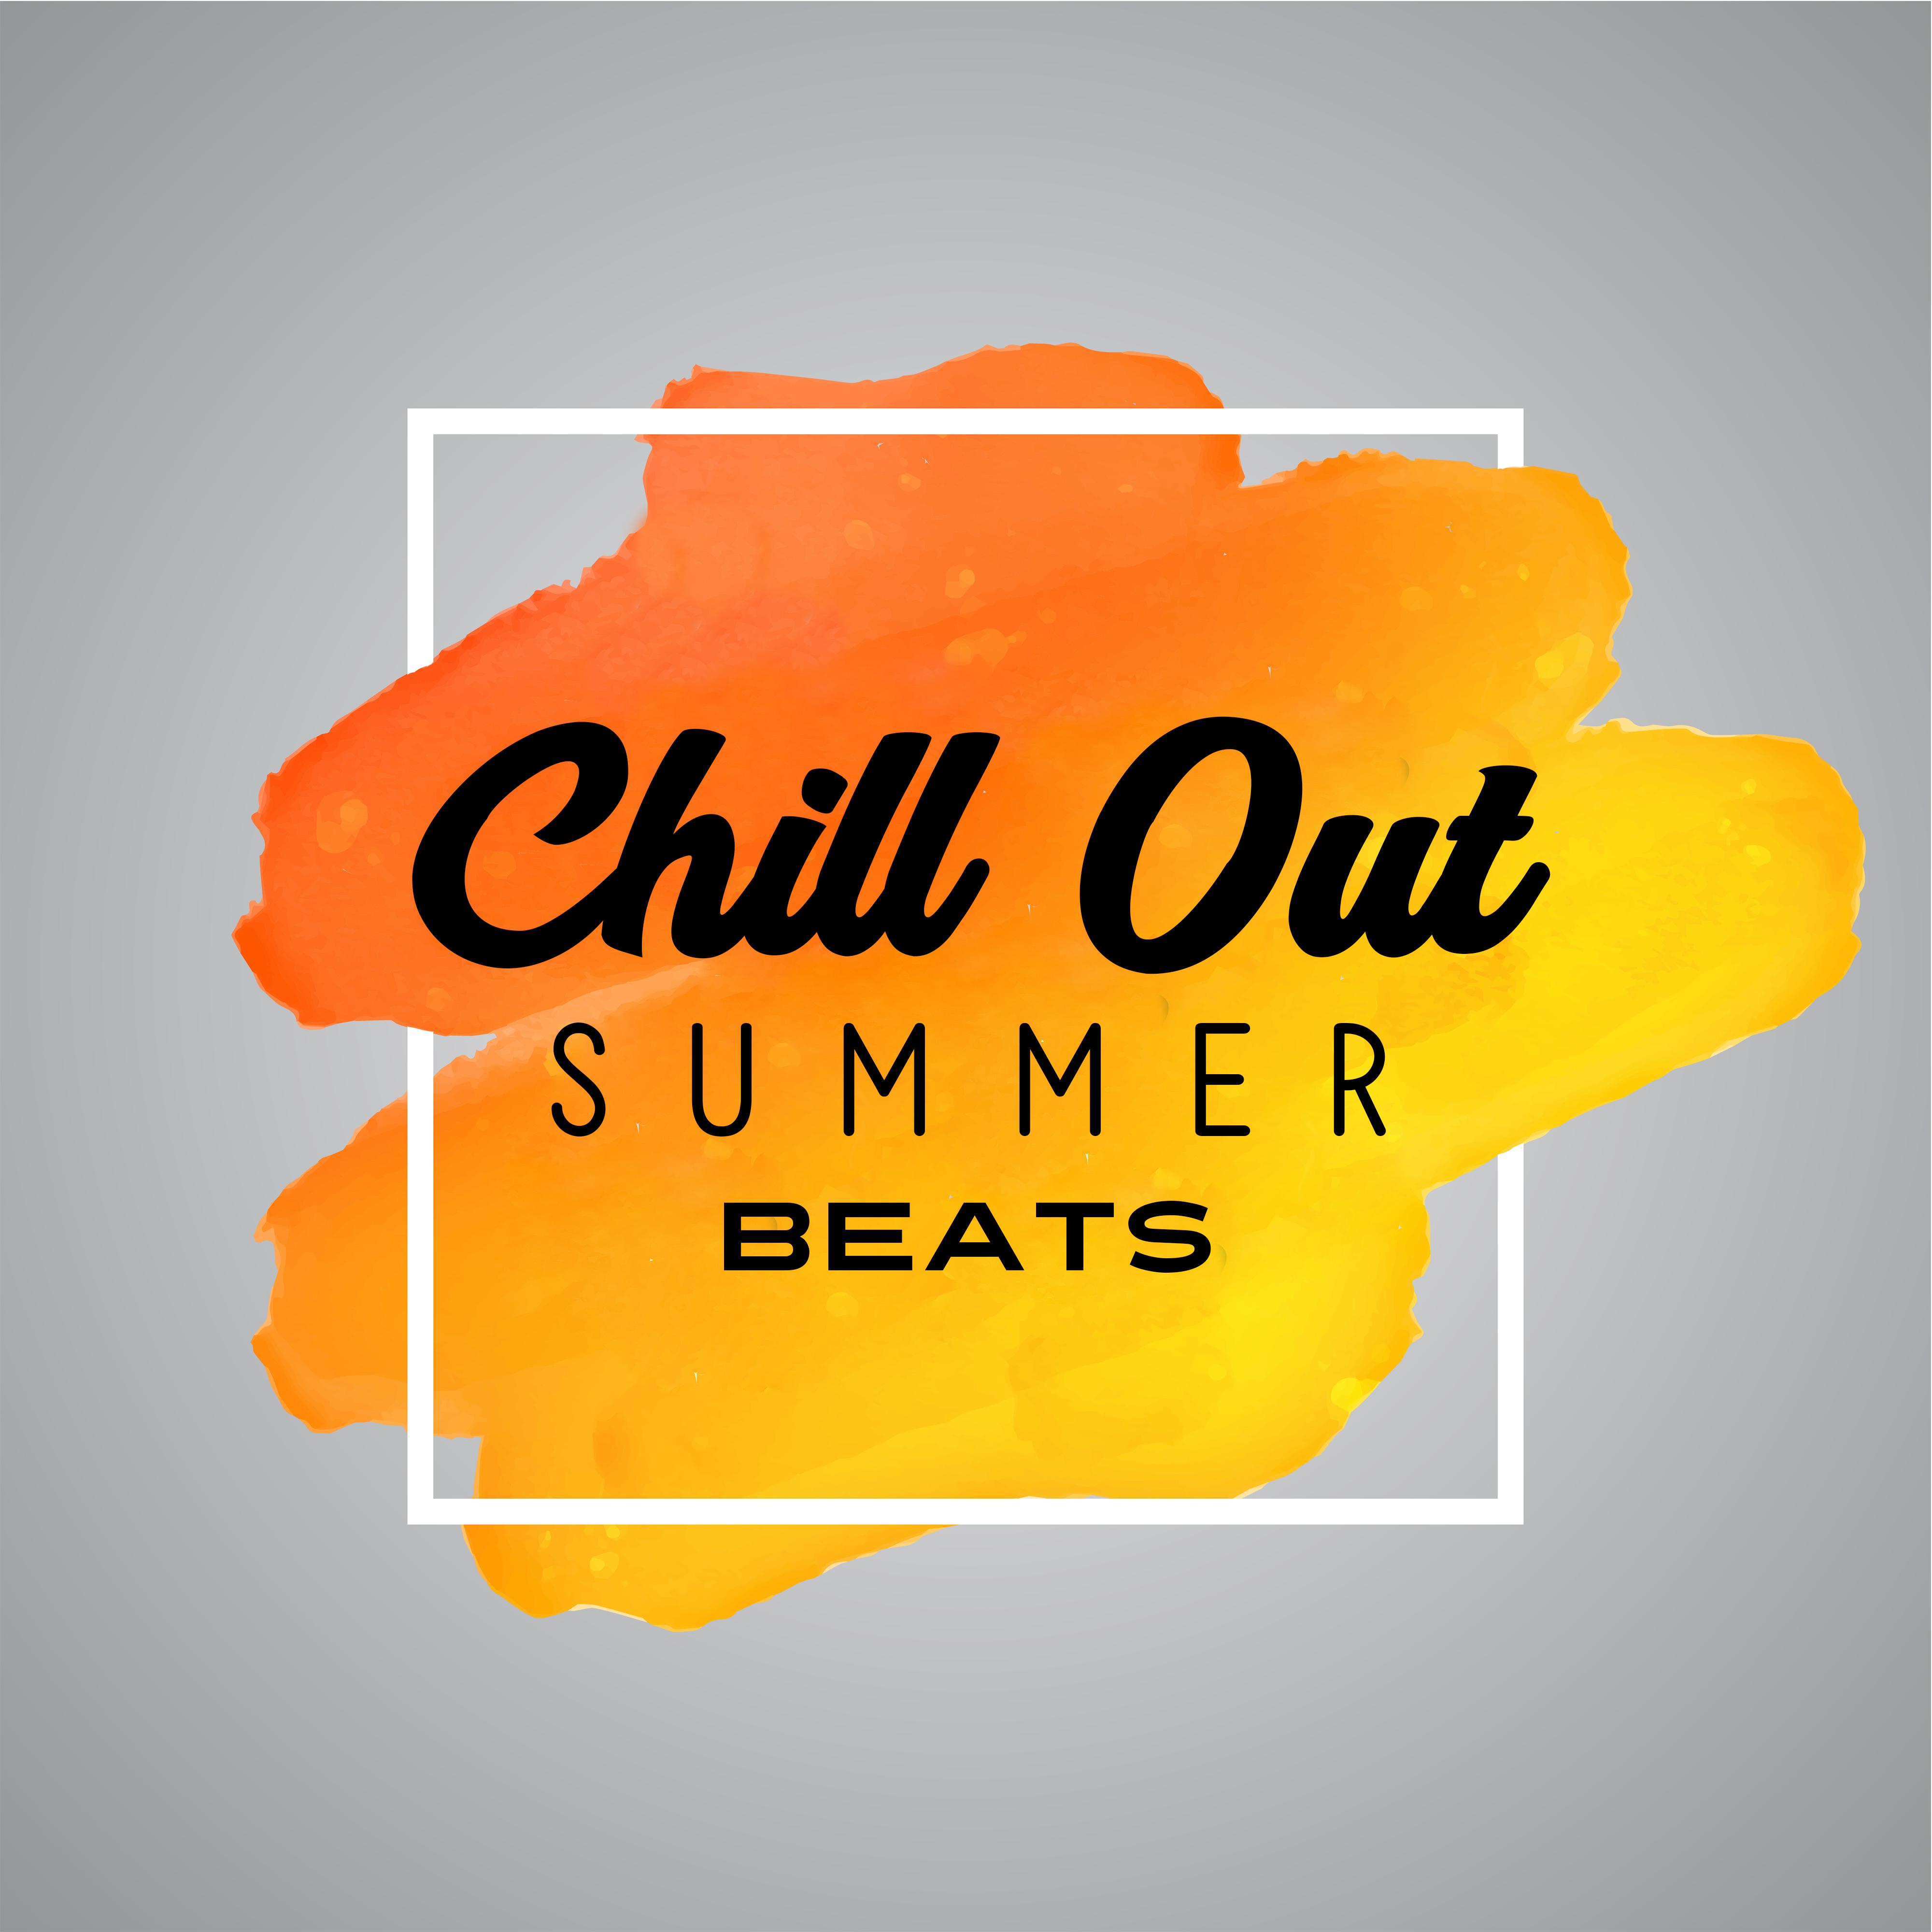 Chill Out Summer Beats